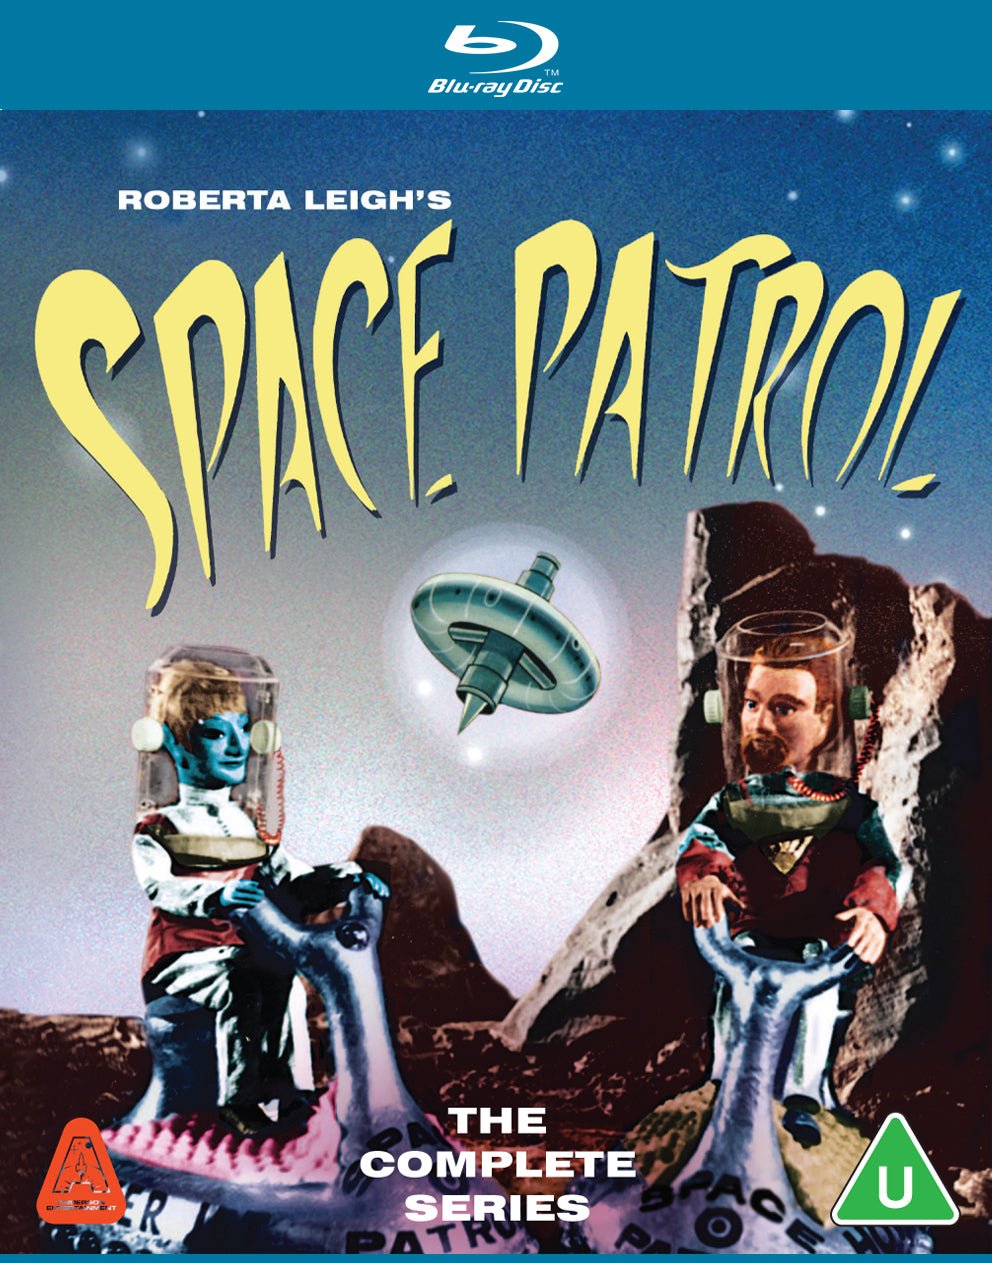 Space Patrol: The Complete Series [Blu-ray] (Region ABC) - The Gerry Anderson Store